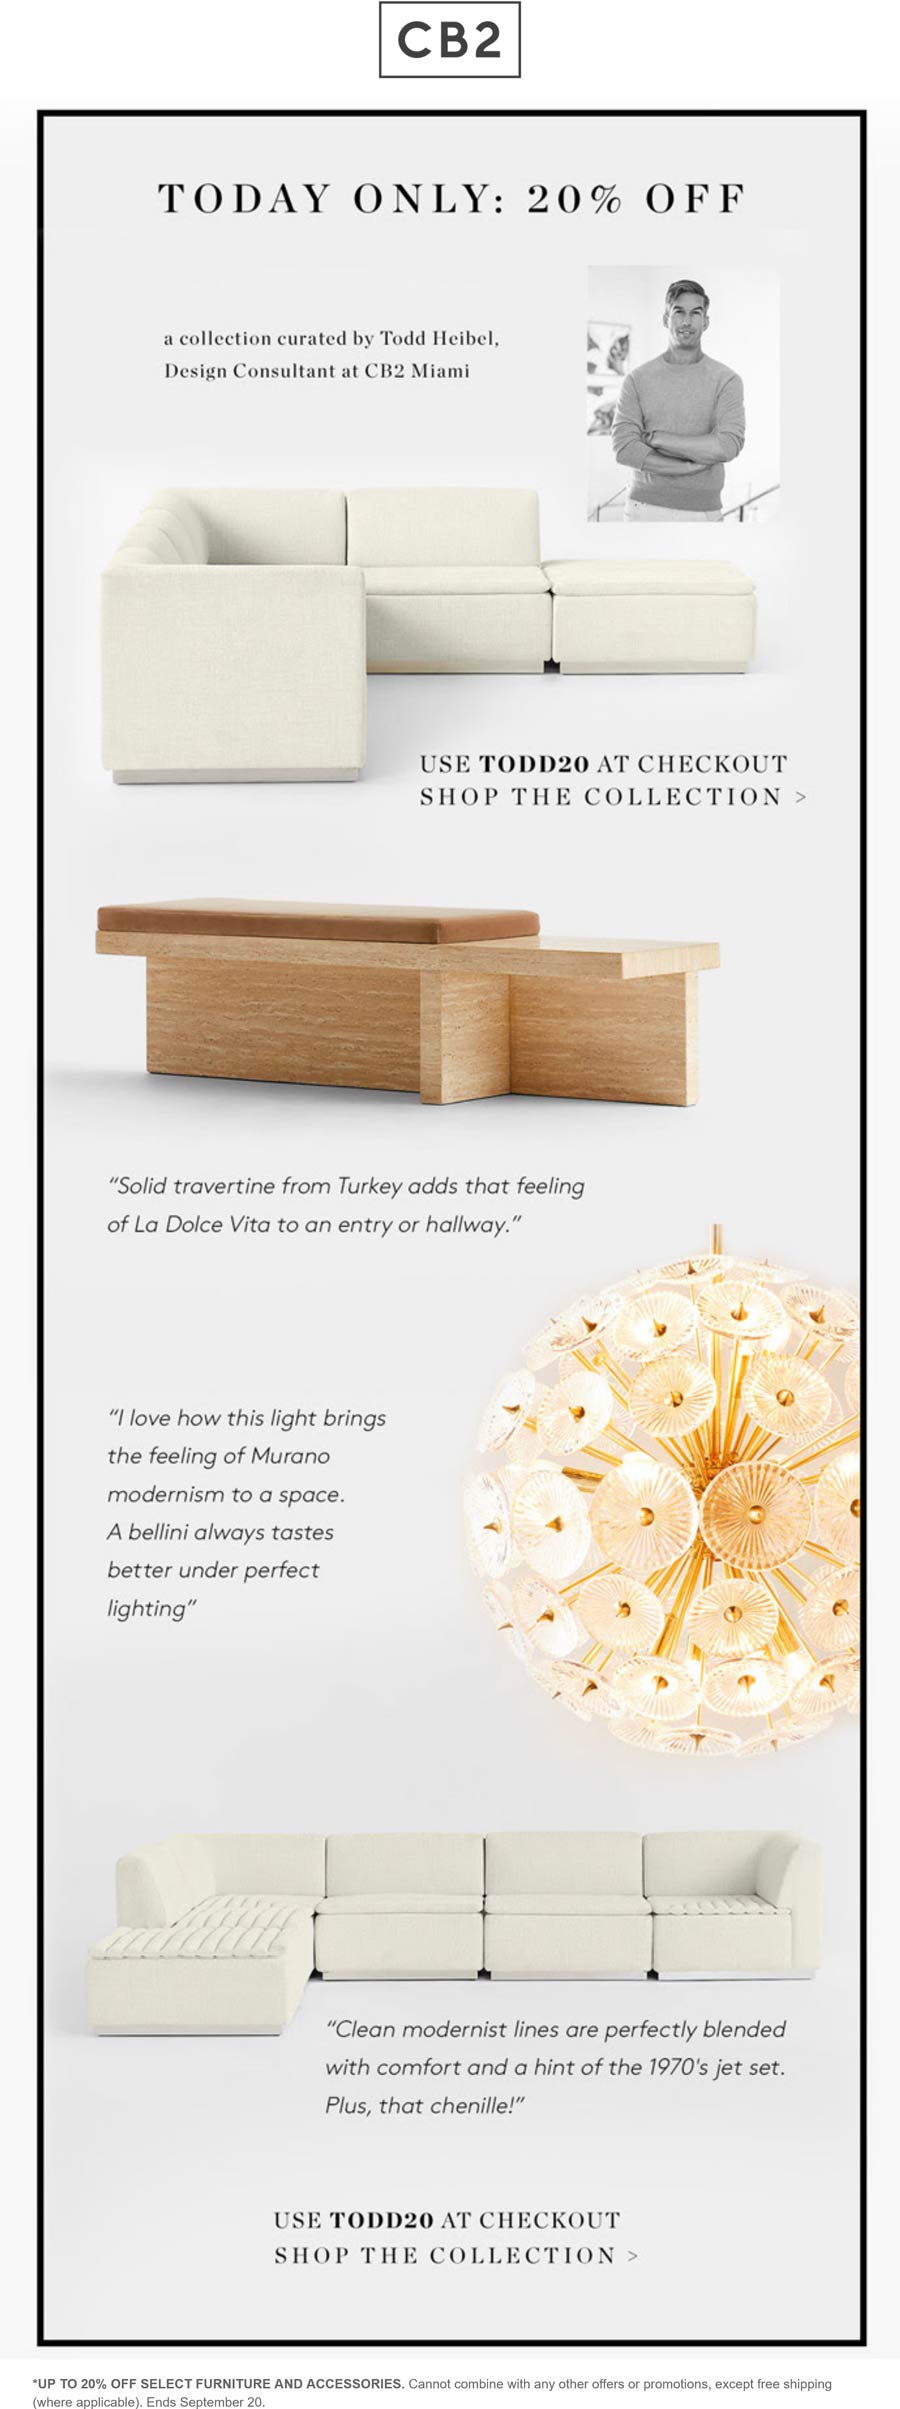 CB2 stores Coupon  20% off today at Crate & Barrel CB2 via promo code TODD20 #cb2 